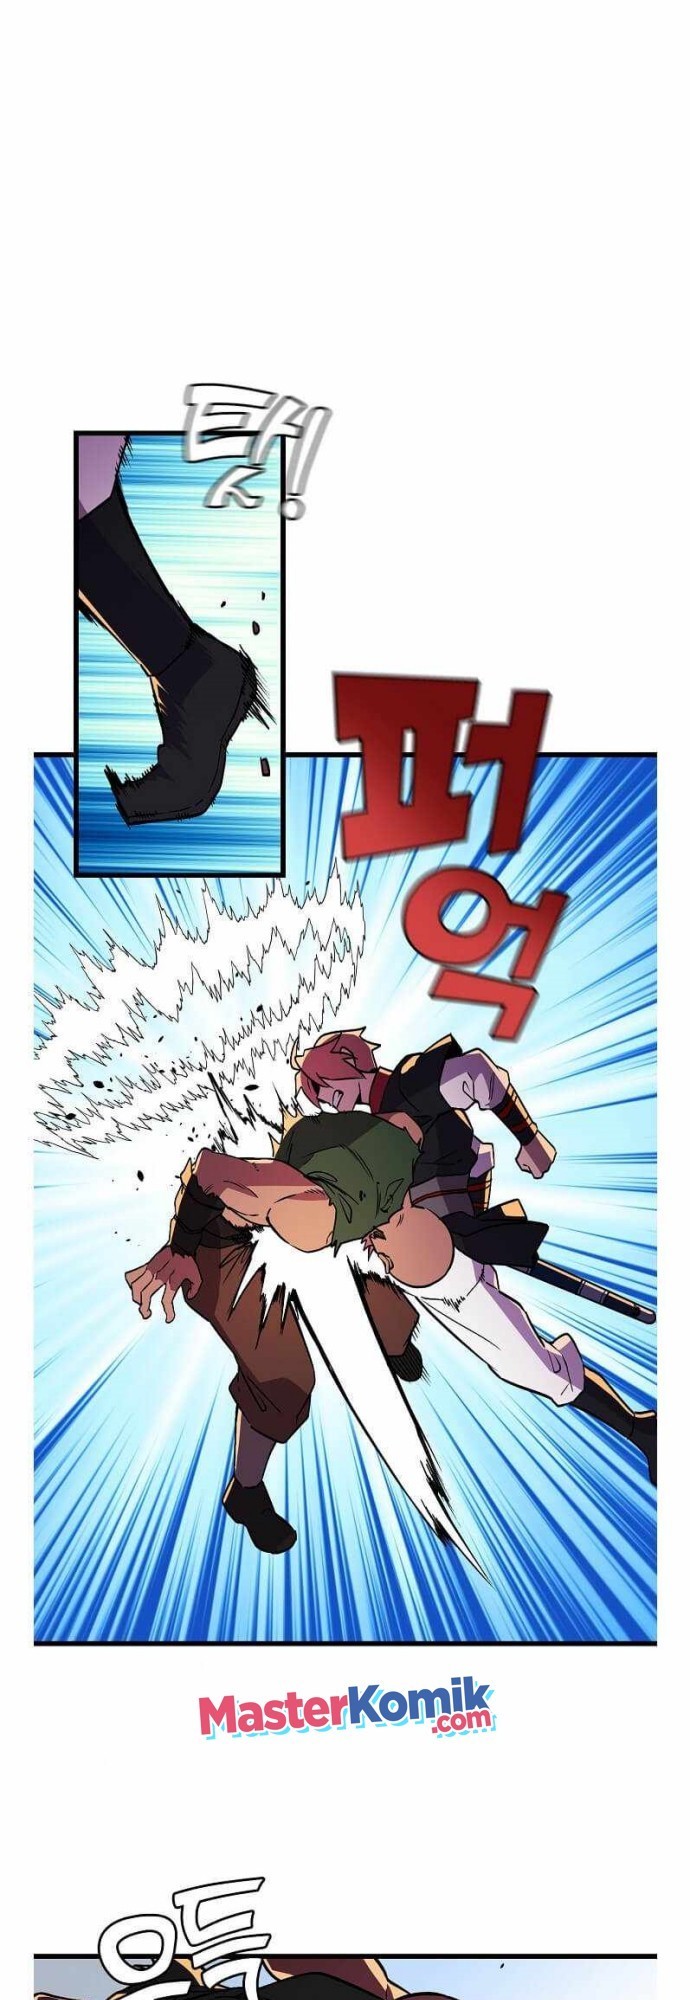 Absolute Martial Arts Chapter 41